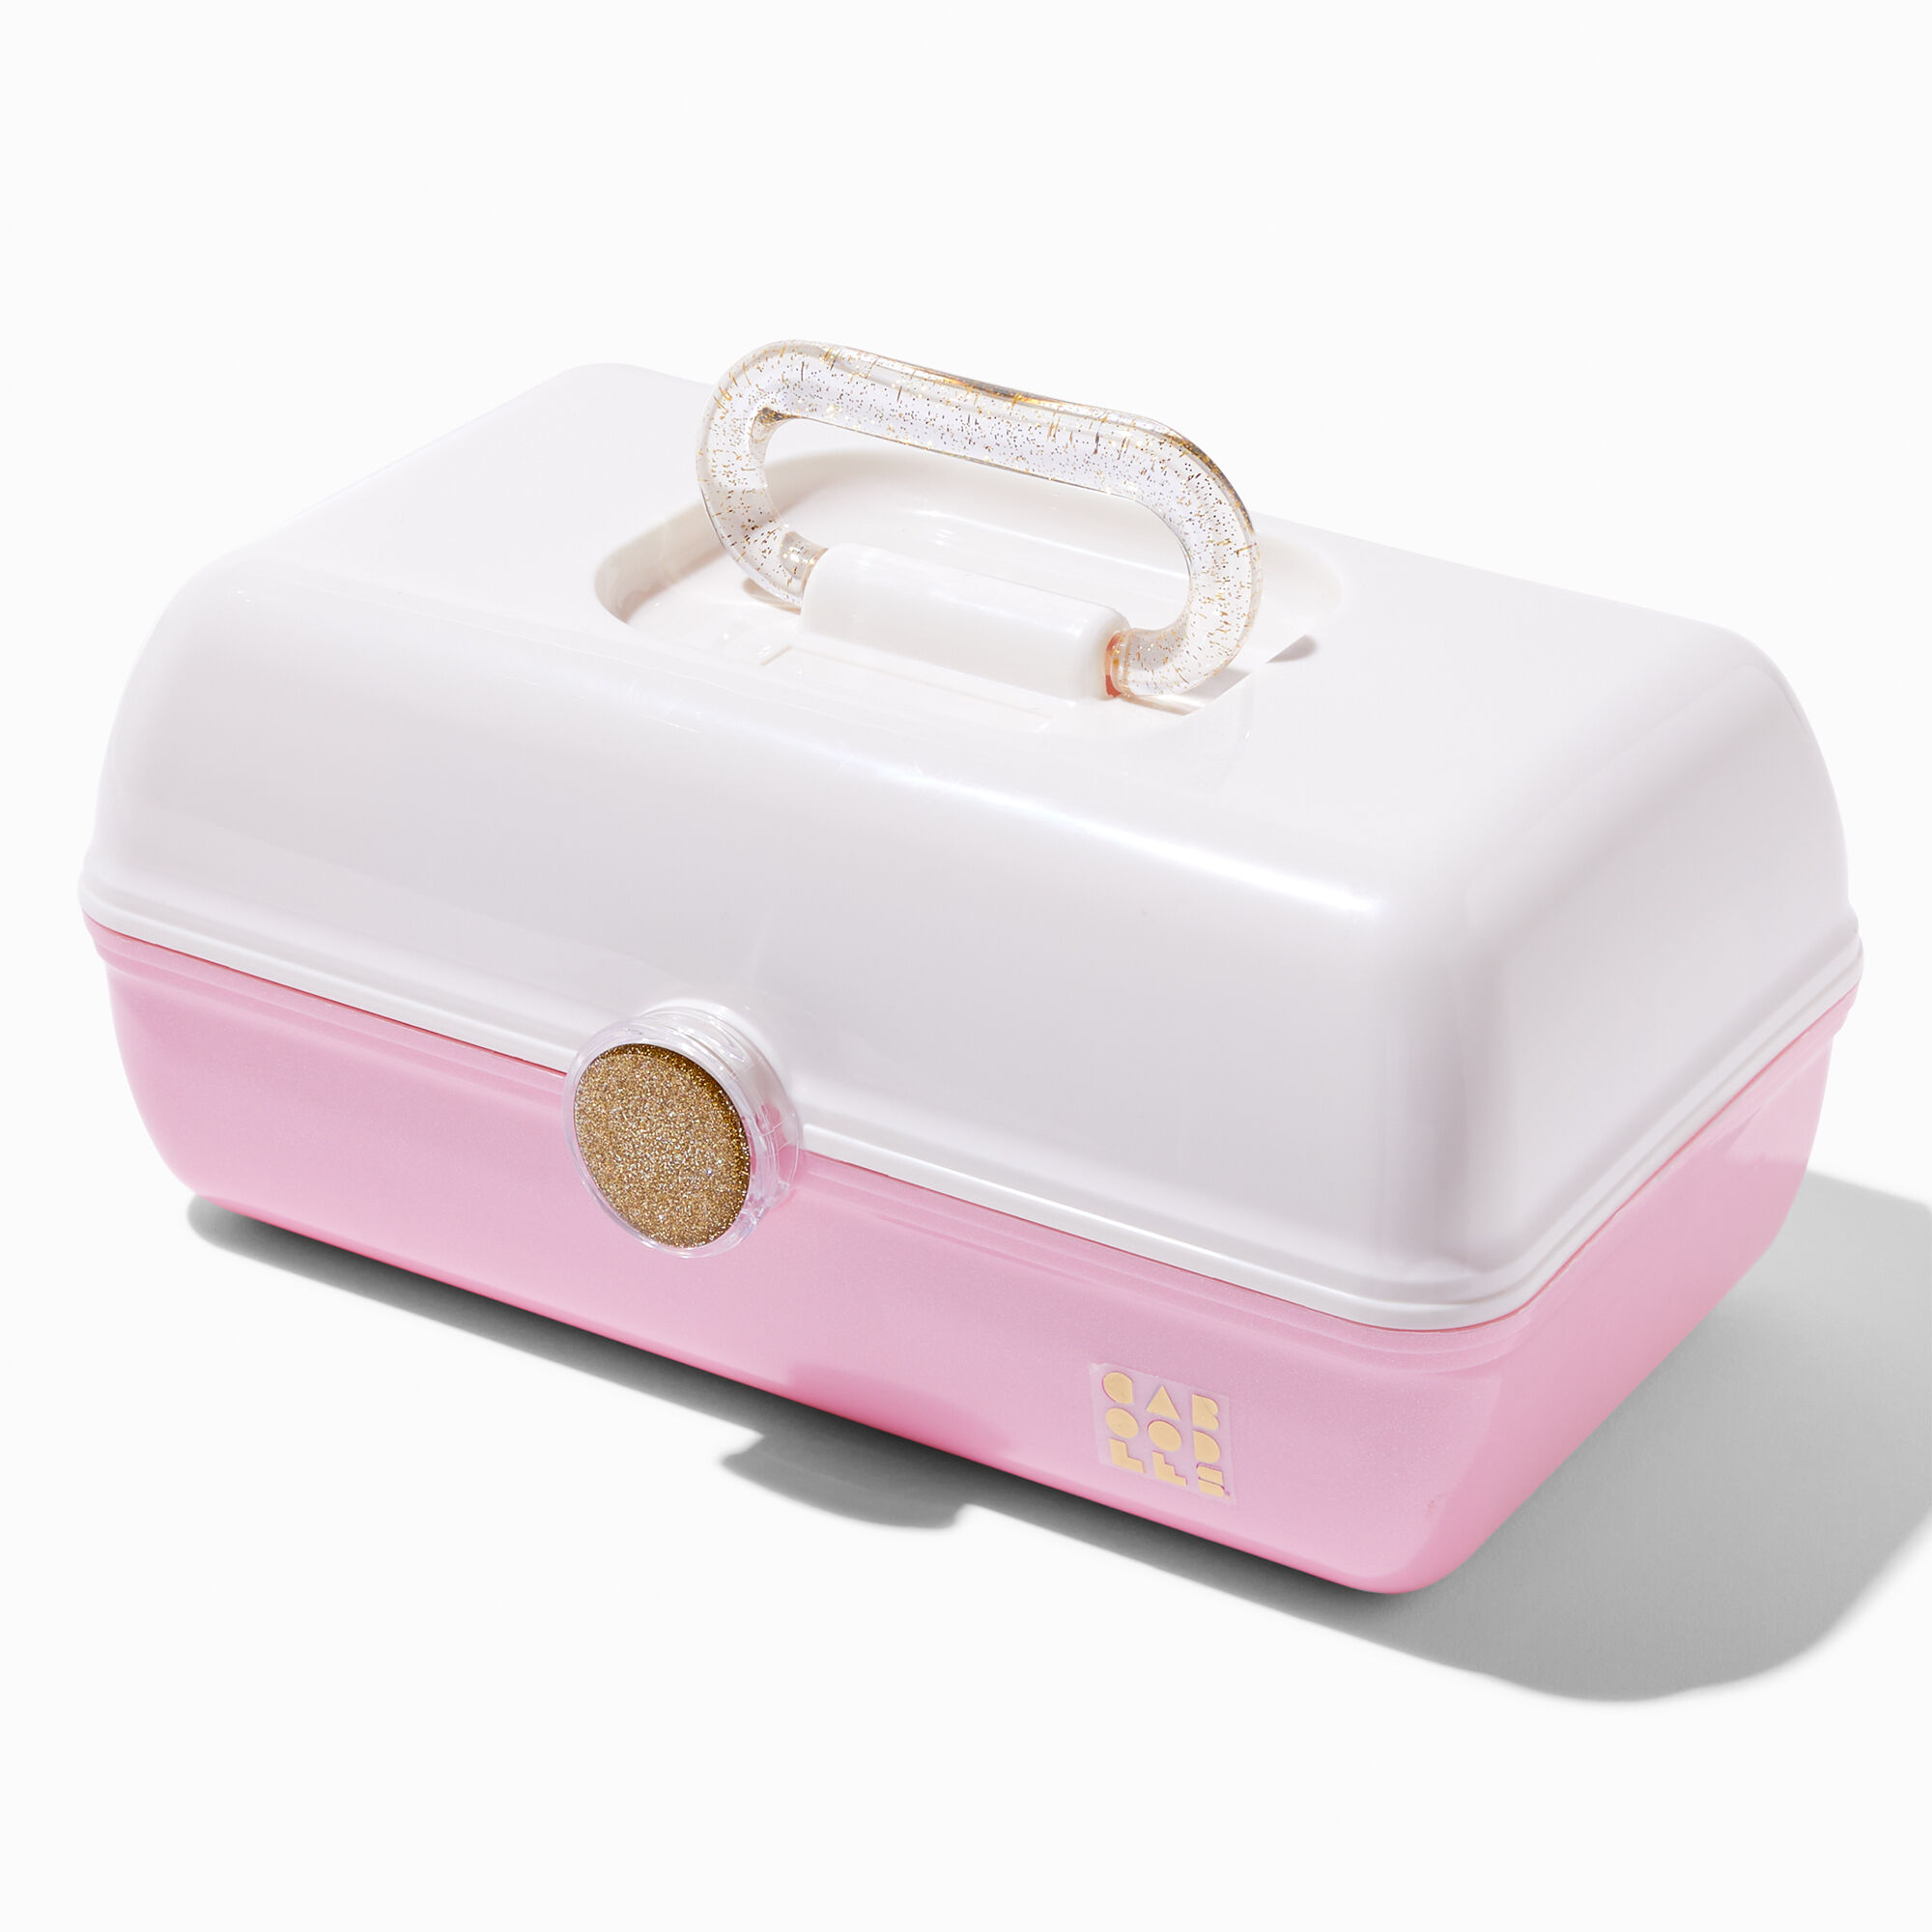 Claire's Features - Caboodles Makeup Case, Pretty in Petite Medium Organizer Storage Box with Mirror - Pink Over Lavendar: 9 x 5.5 x 3.8 Inches